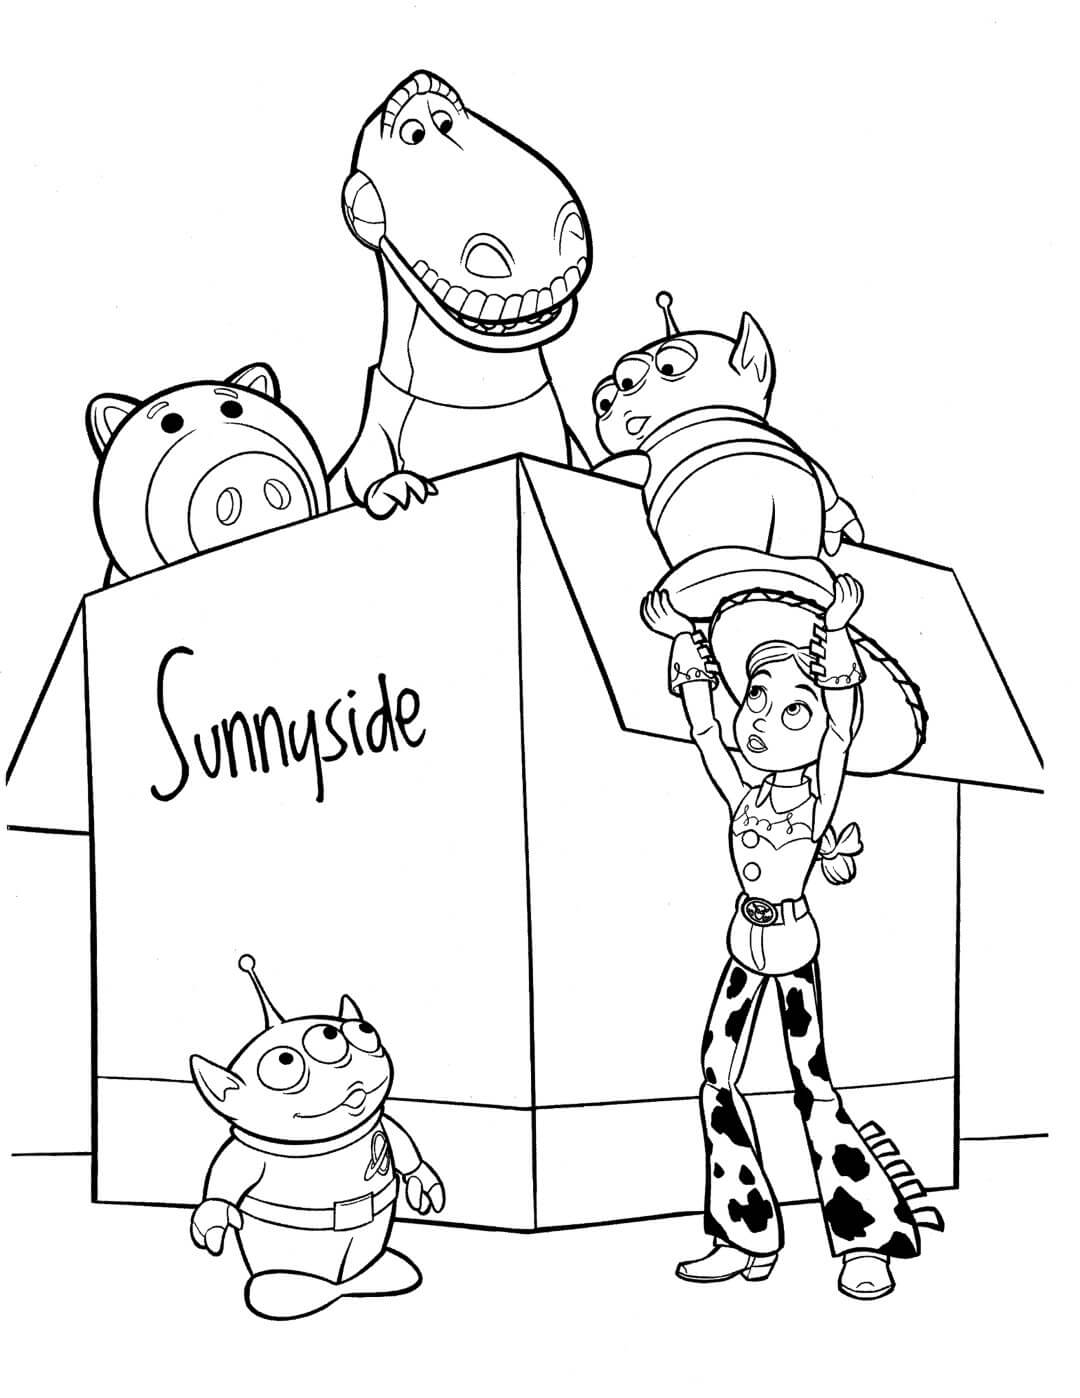 Printable Toy Story Coloring Pages